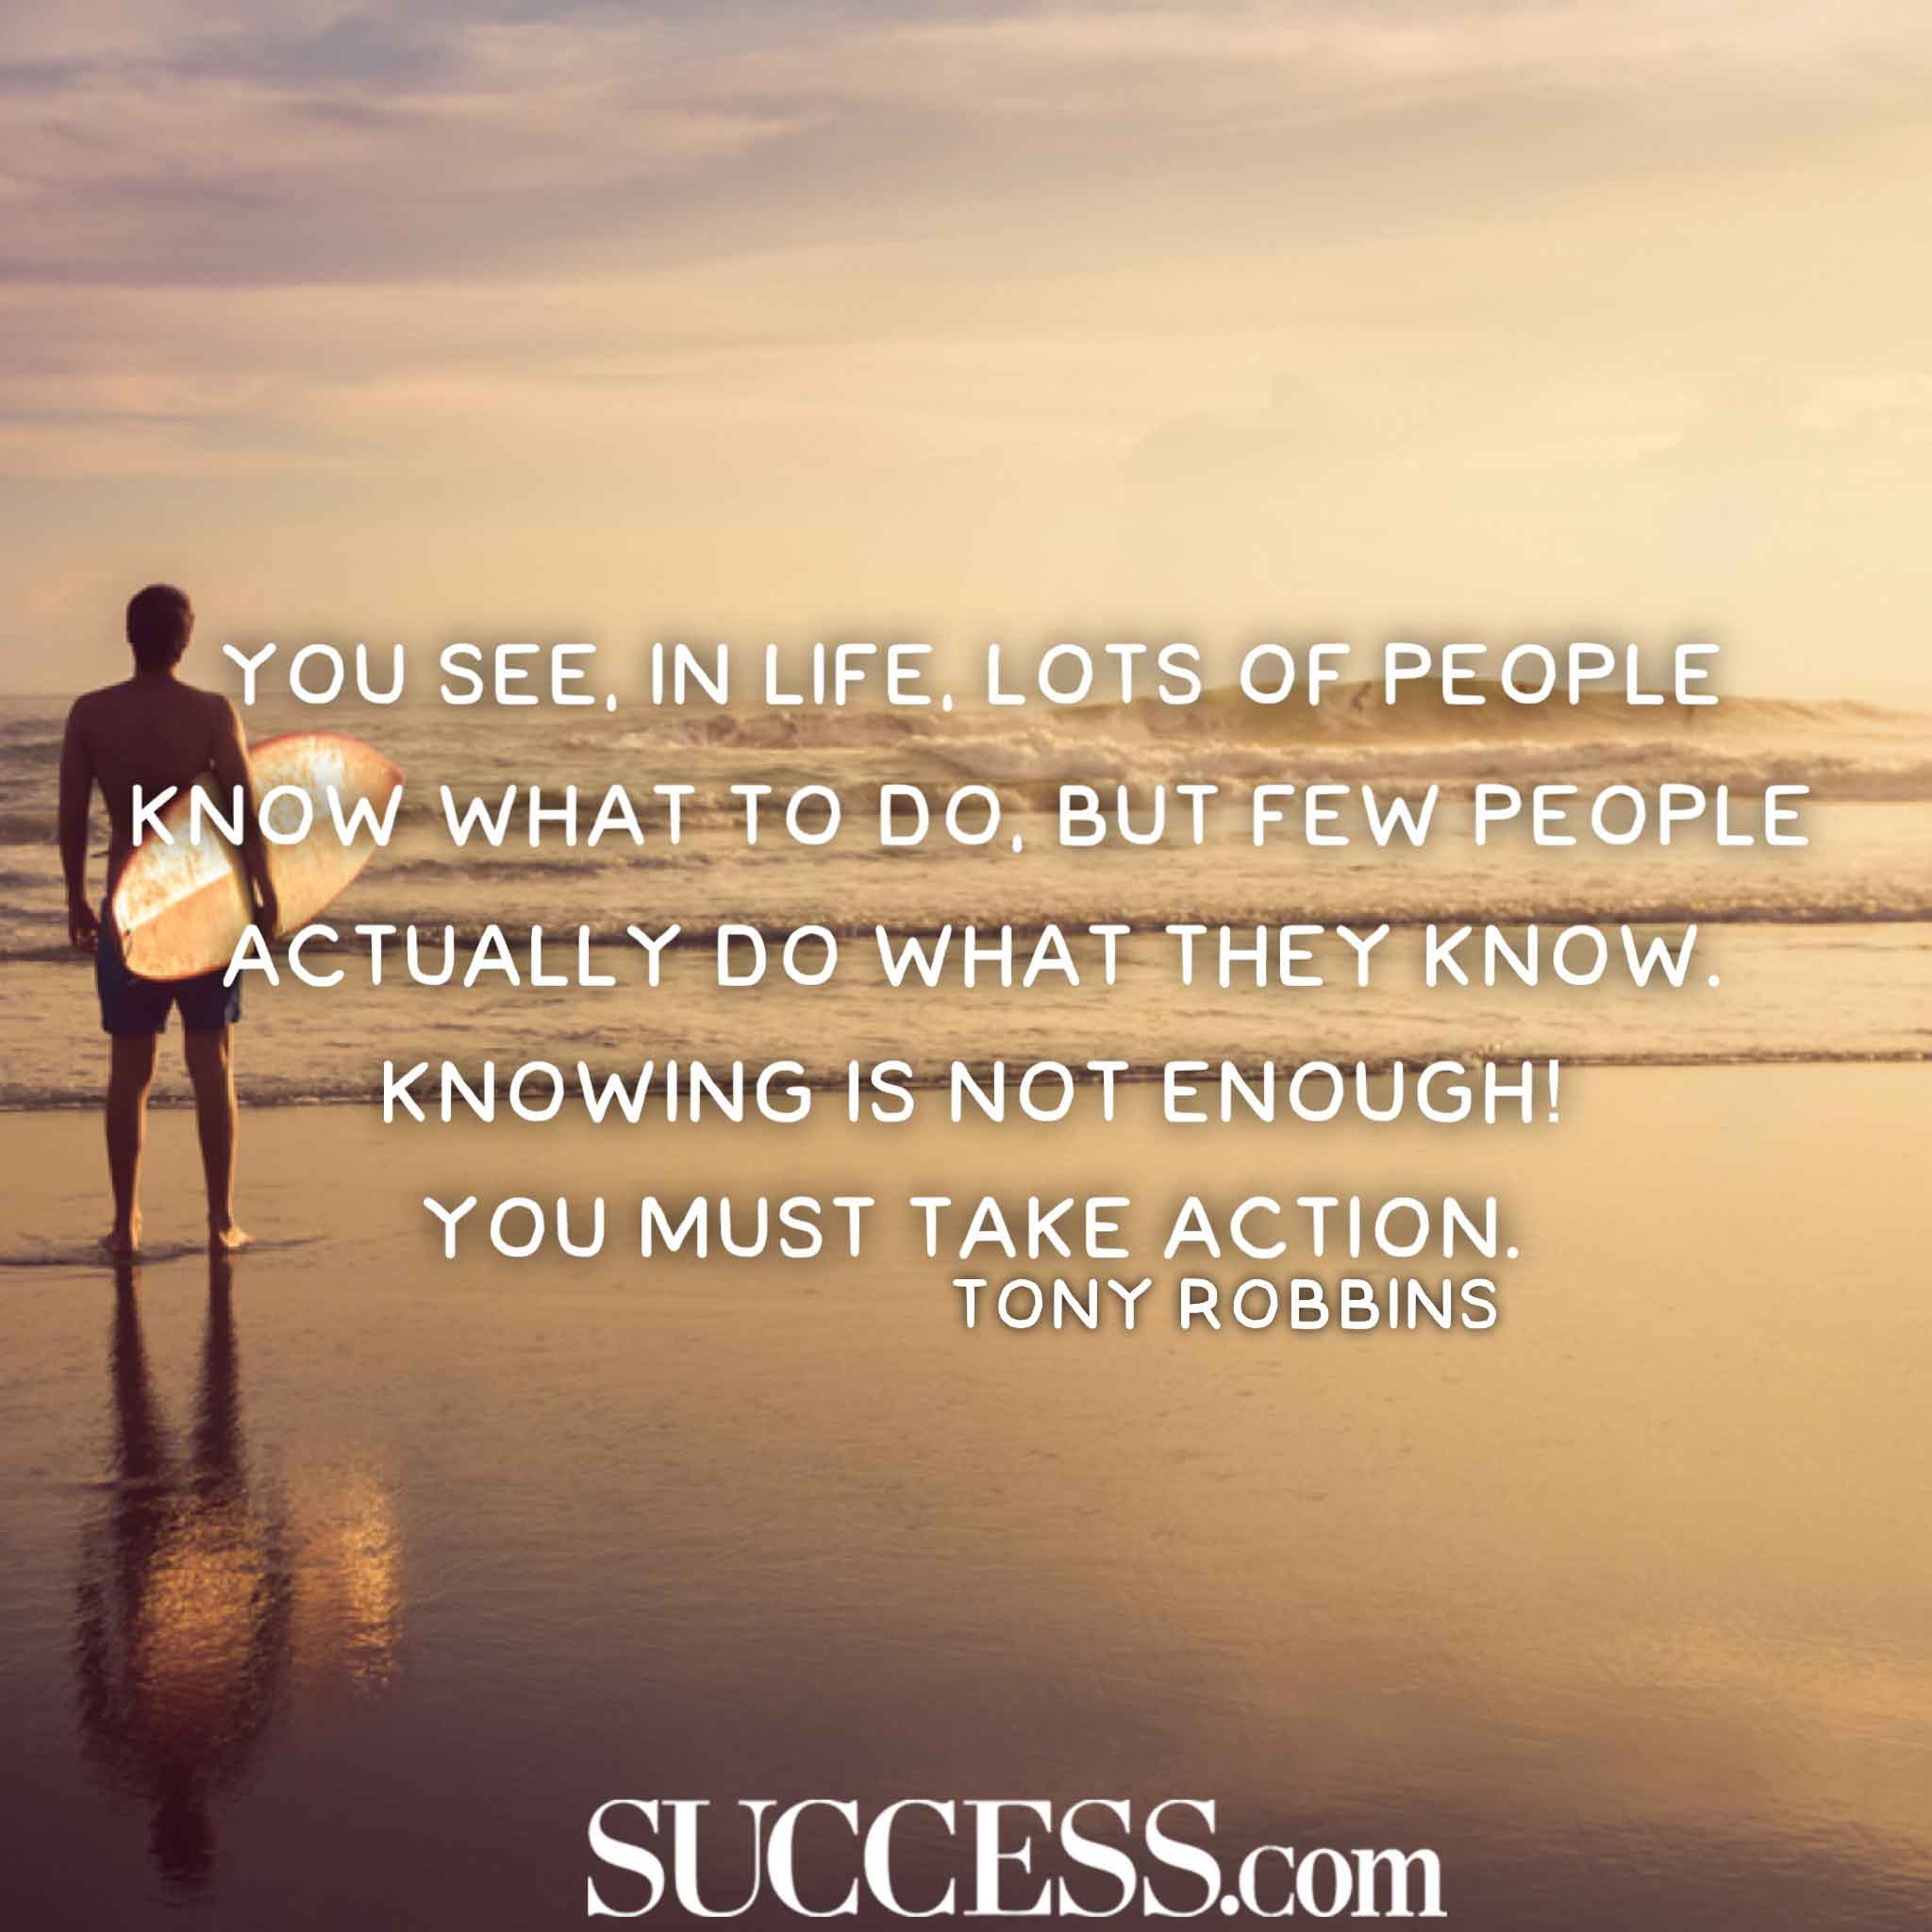 “You see in life lots of people know what to do but few people actually do what they know. Knowing is not enough You must take action.” —Tony Robbins-hoogbegaafd